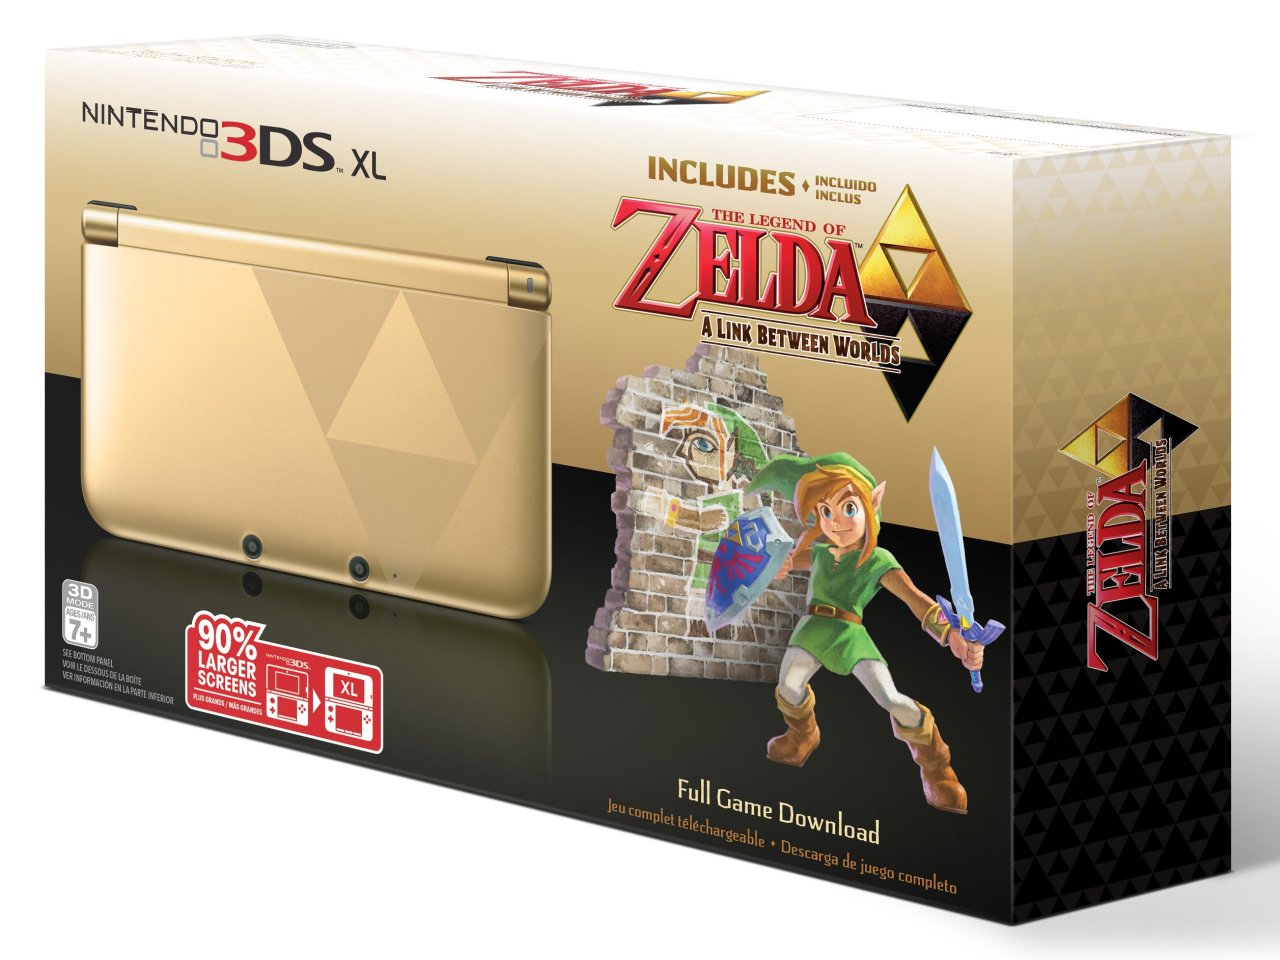 Limited Edition Gold And Black Zelda Triforce 3DS XL System (Nintendo 3DS)